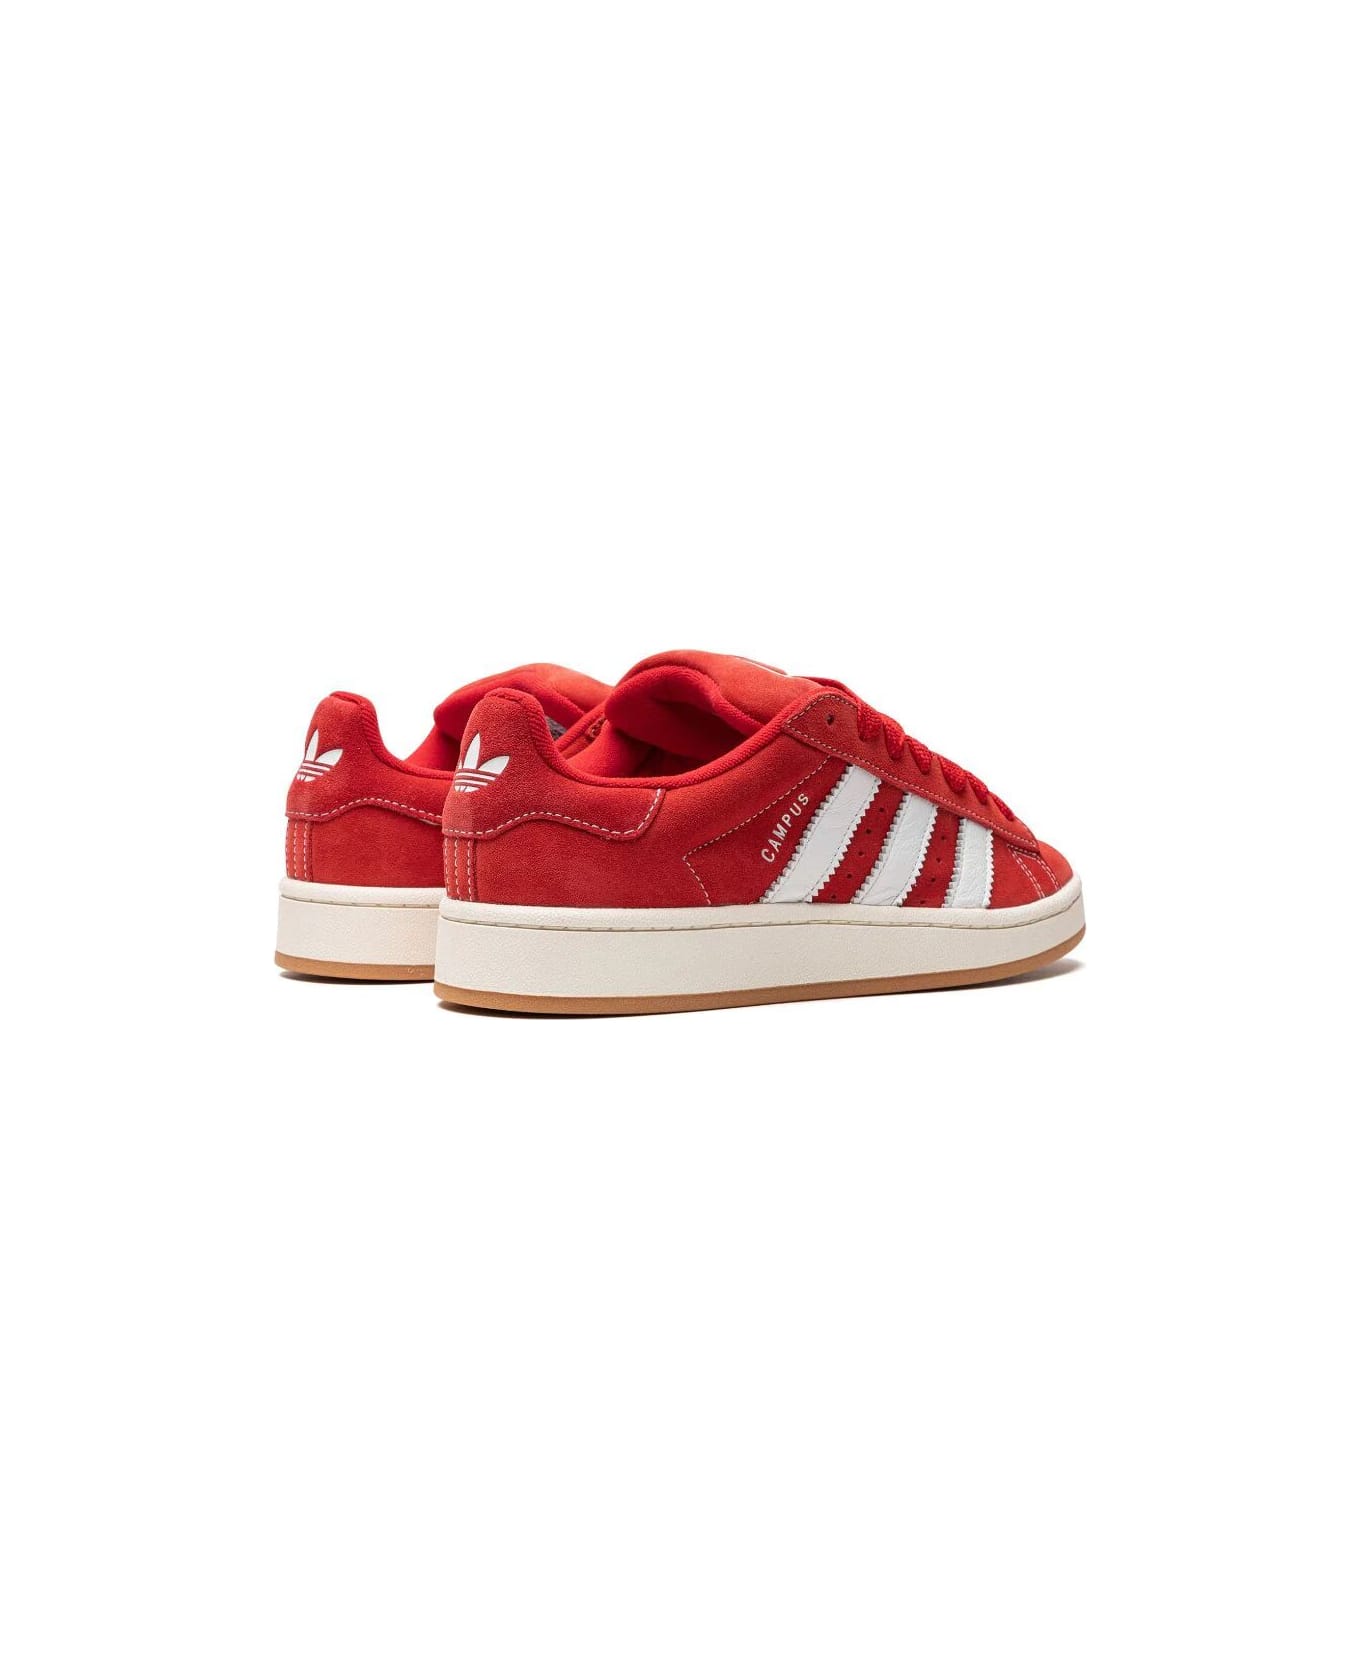 Adidas Campus 00s Sneakers - Betsca Ftwwht Owhite スニーカー